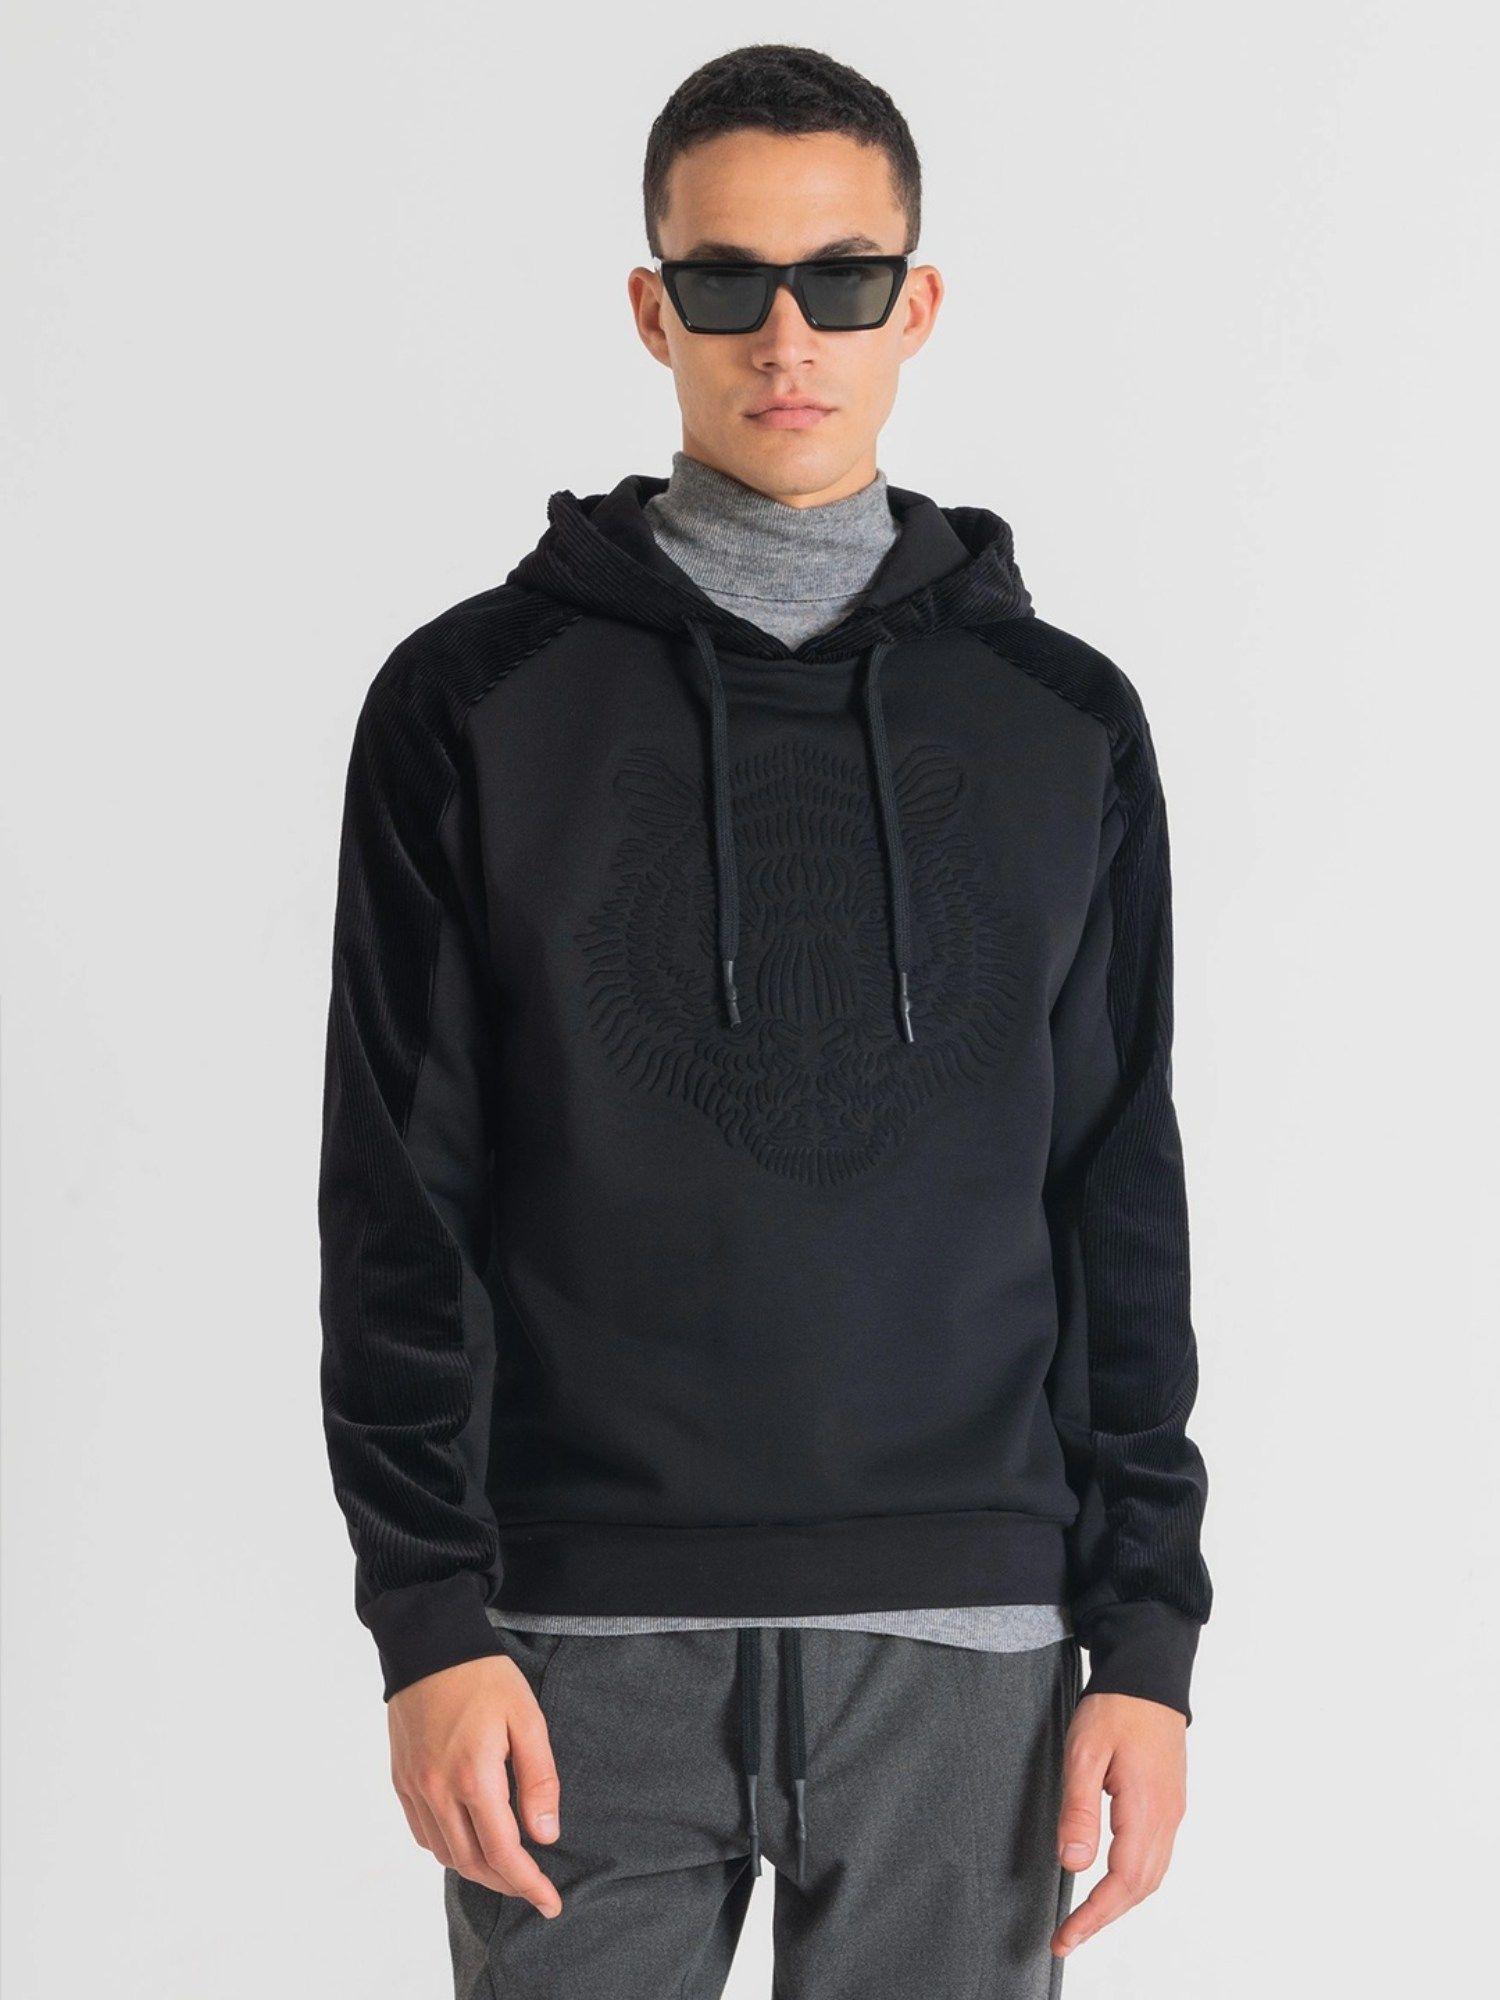 hoodie regular fit in cotton polyester blend fabric with embossed print